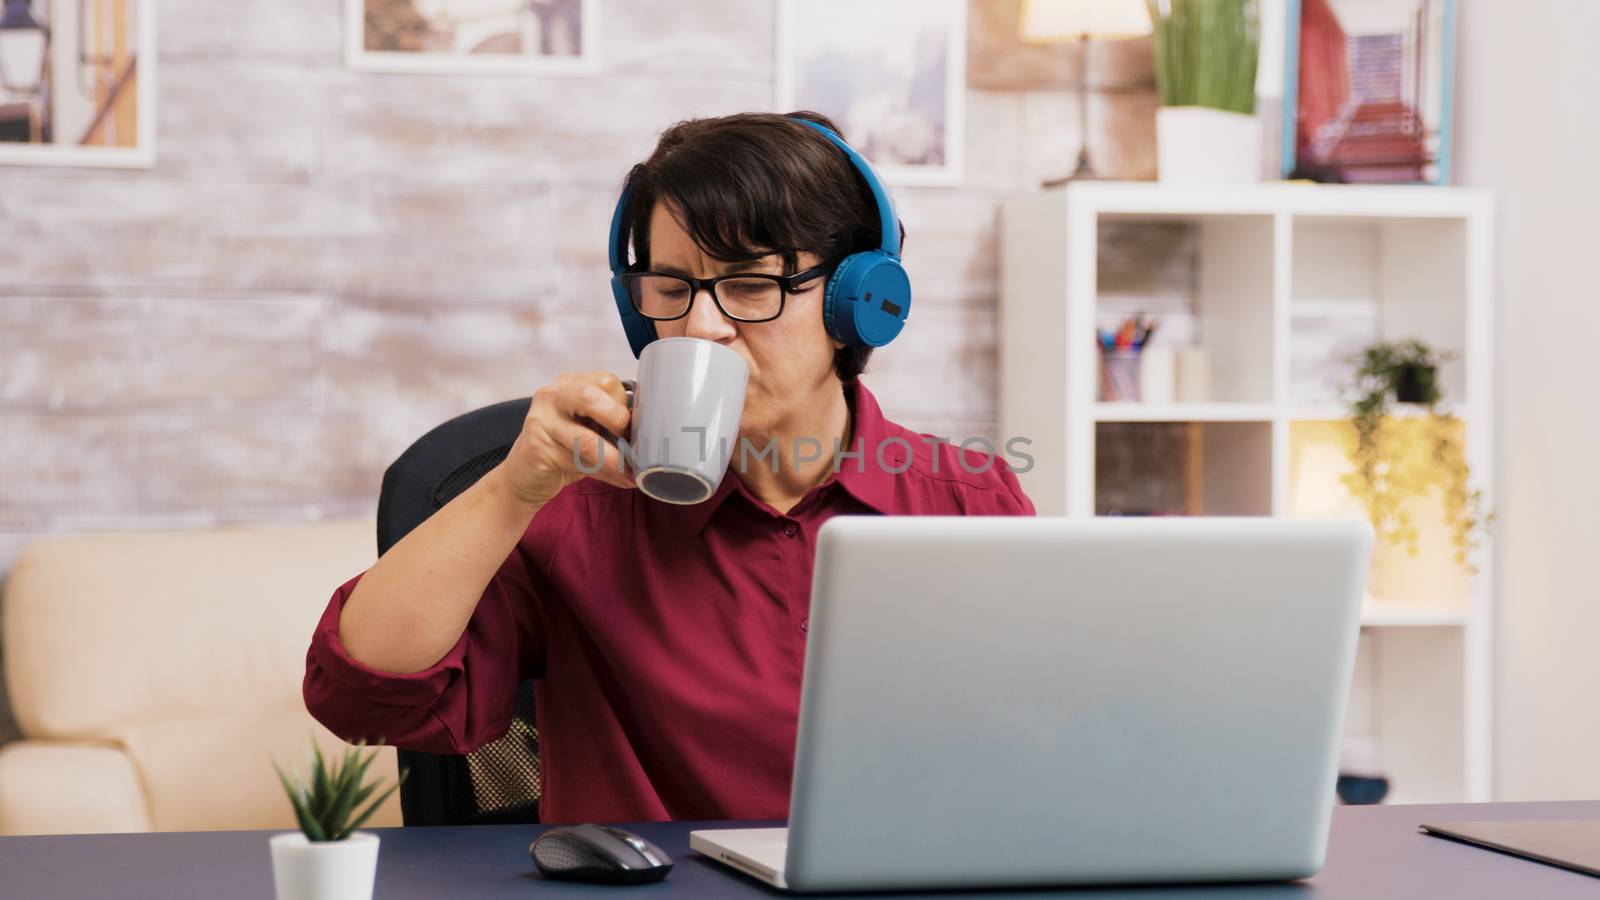 Old woman enjoying a cup of coffee while working on laptop by DCStudio